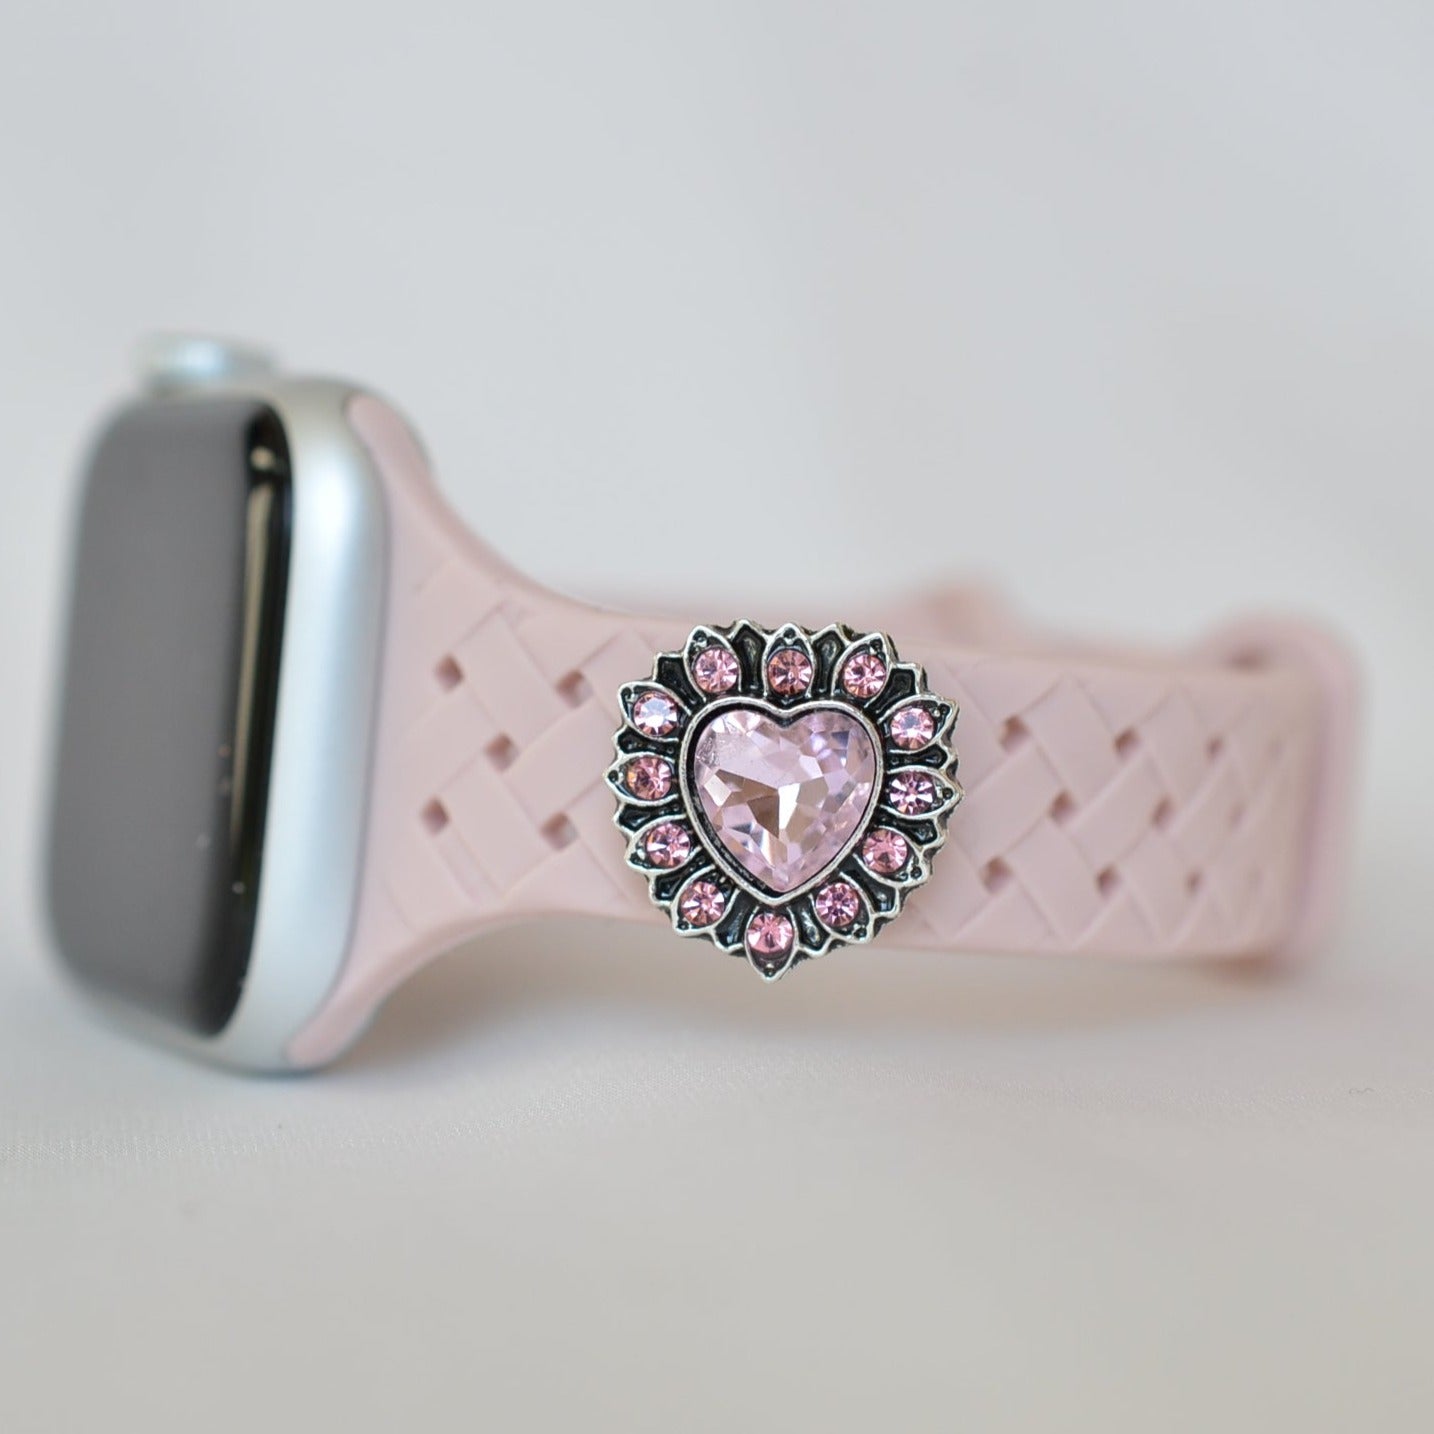 Light Pink Apple Band with Charm